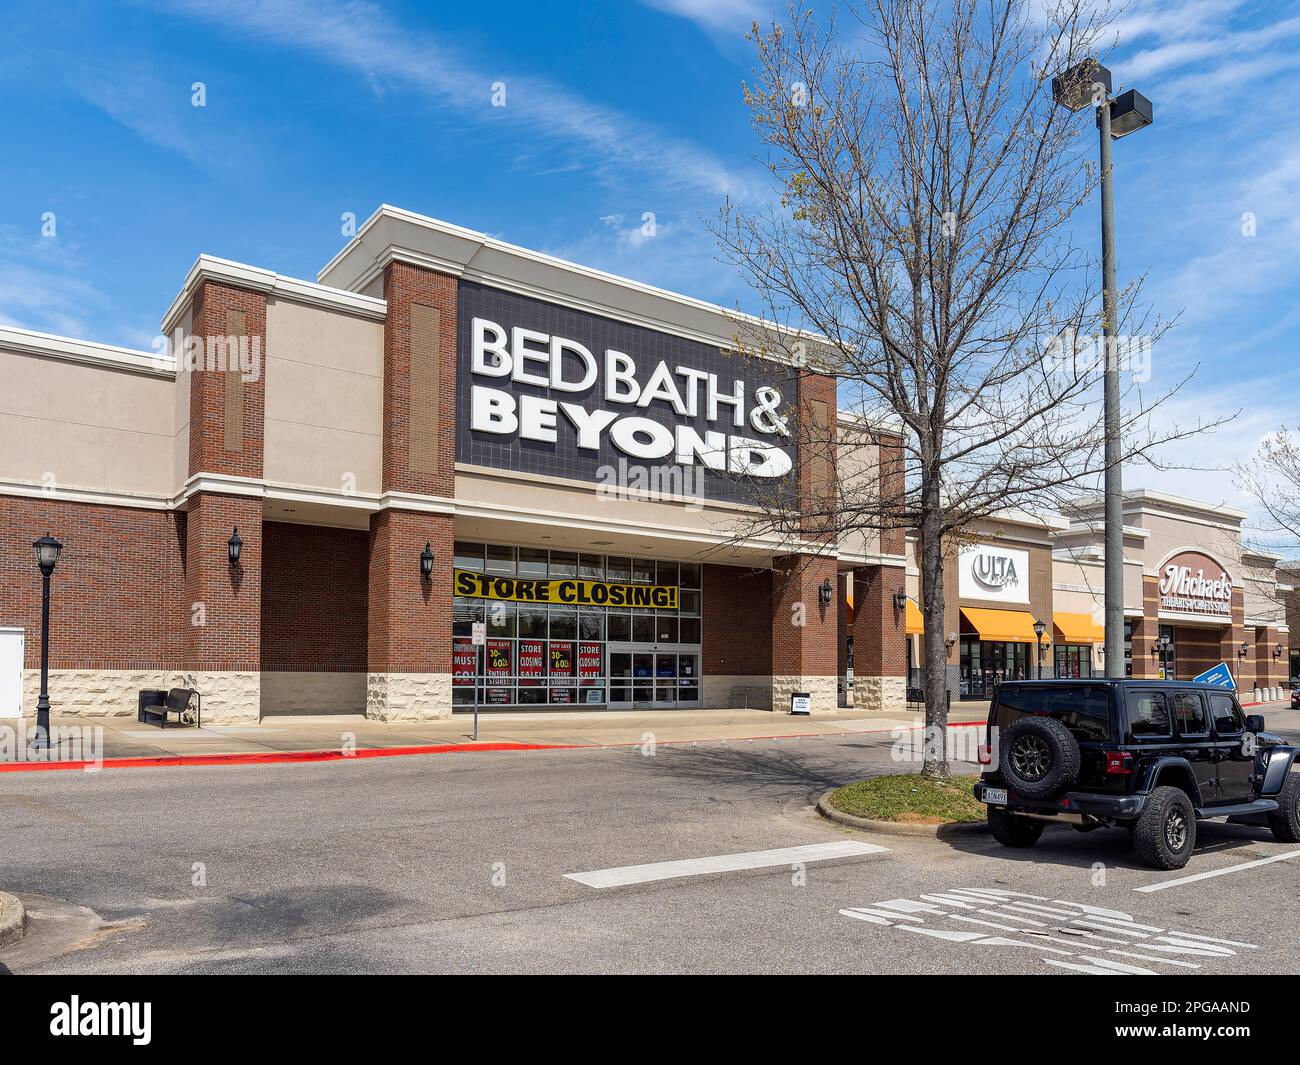 Store Closing sign on Bed Bath and Beyond front exterior showing the corporate logo and sign another business closing in Montgomery Alabama, USA. Stock Photo